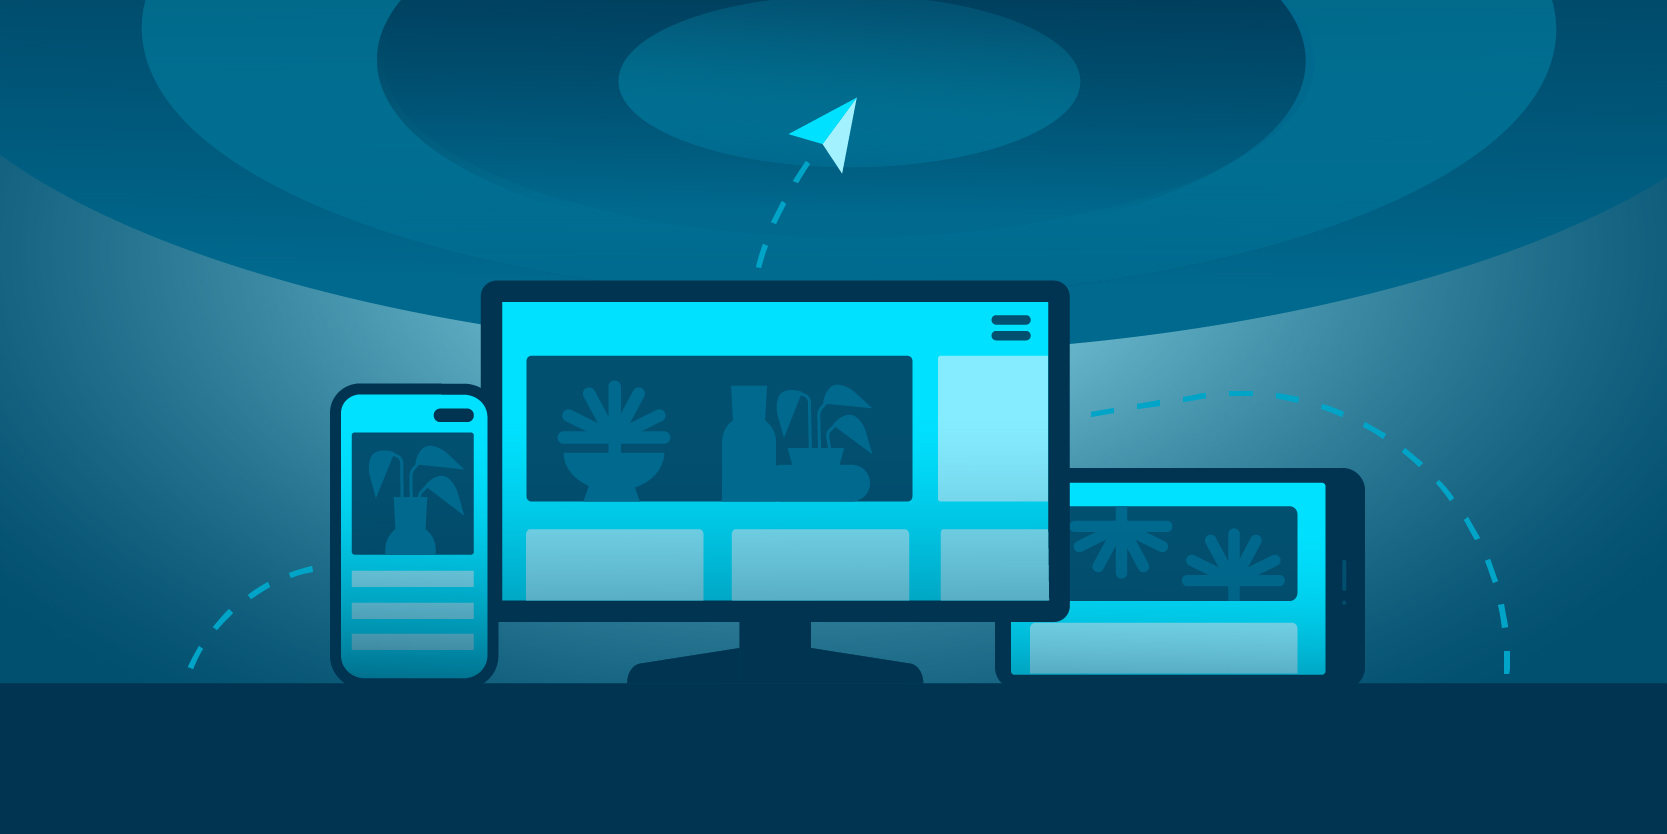 blue background overlayed with graphics of different devices to illustrate cross-device targeting